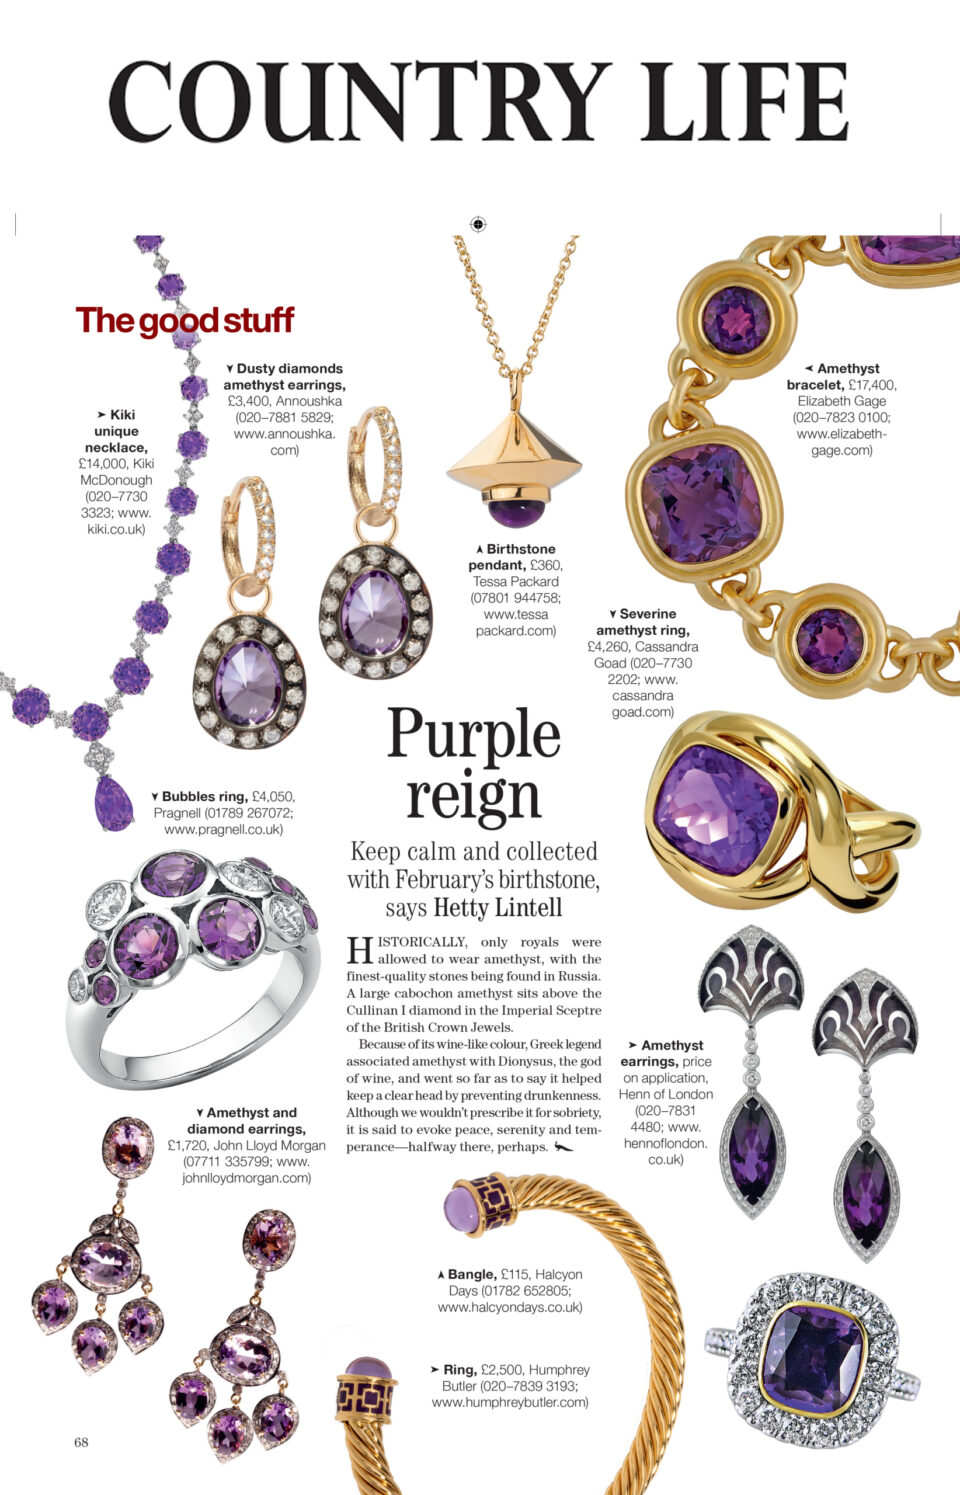 Amethyst birthstone pendant featured in Country Life Magazine